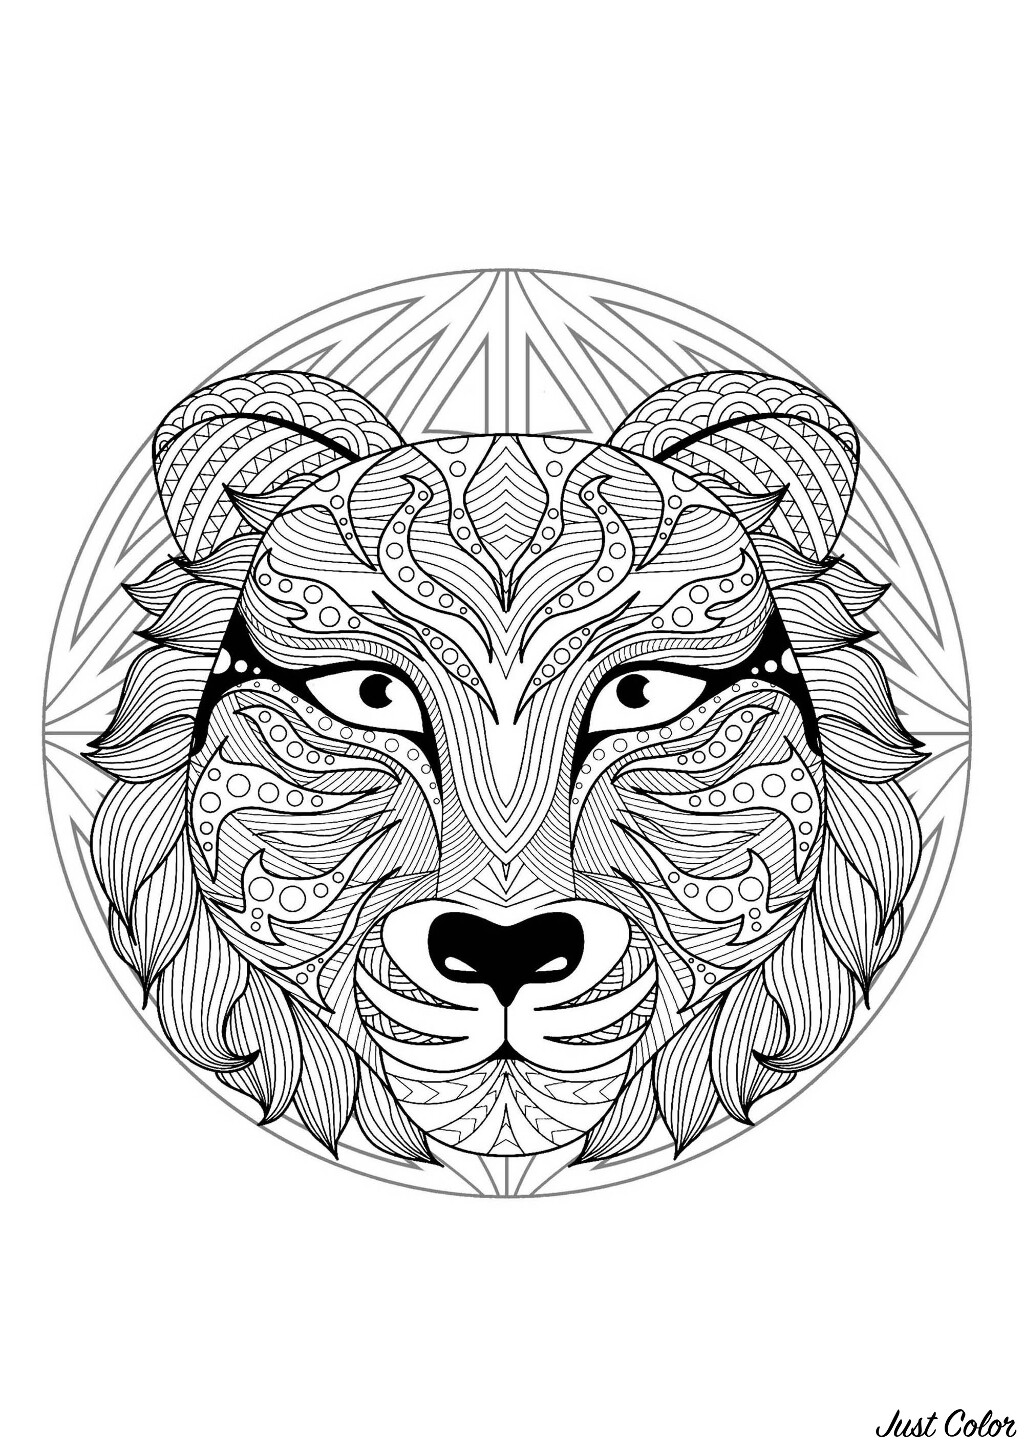 Mandala to color with very special Tiger head and simple patterns in background